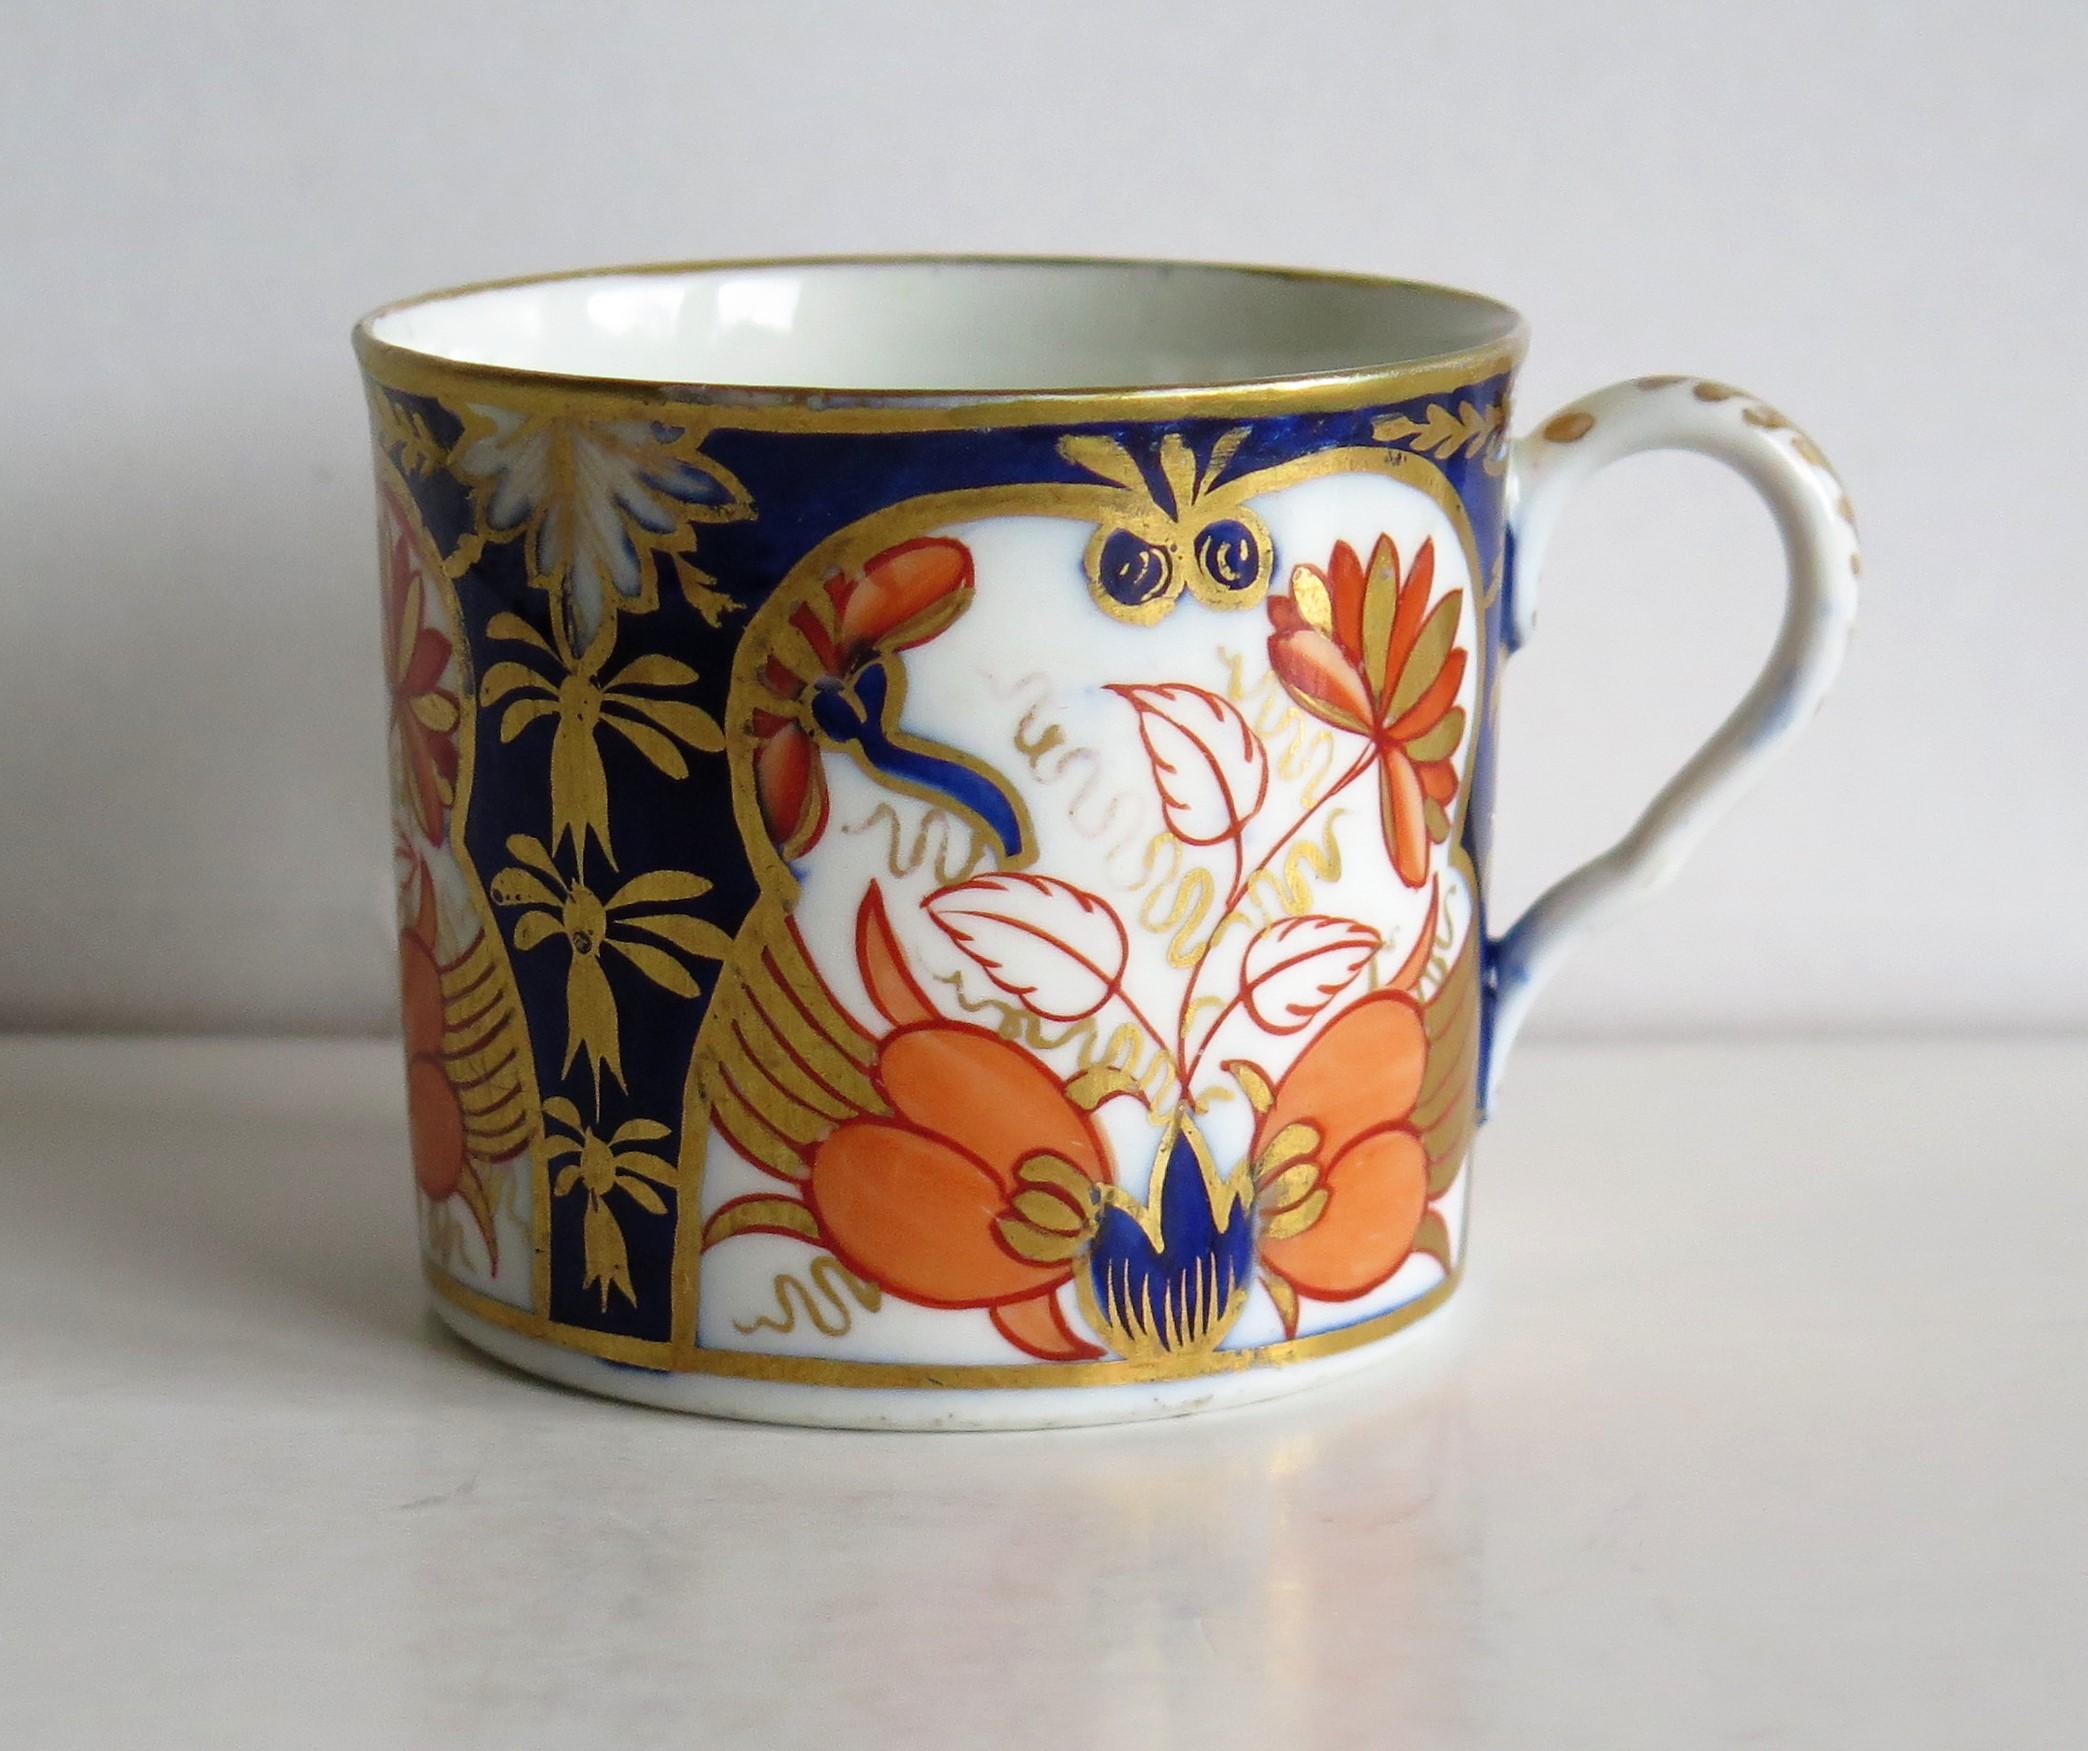 This is a good quality Coffee Can that we attribute to the Coalport Porcelain works, Shropshire, England, made during the John Rose period of the late Georgian years, circa 1810.

The coffee can is nominally parallel, tapering slightly to the